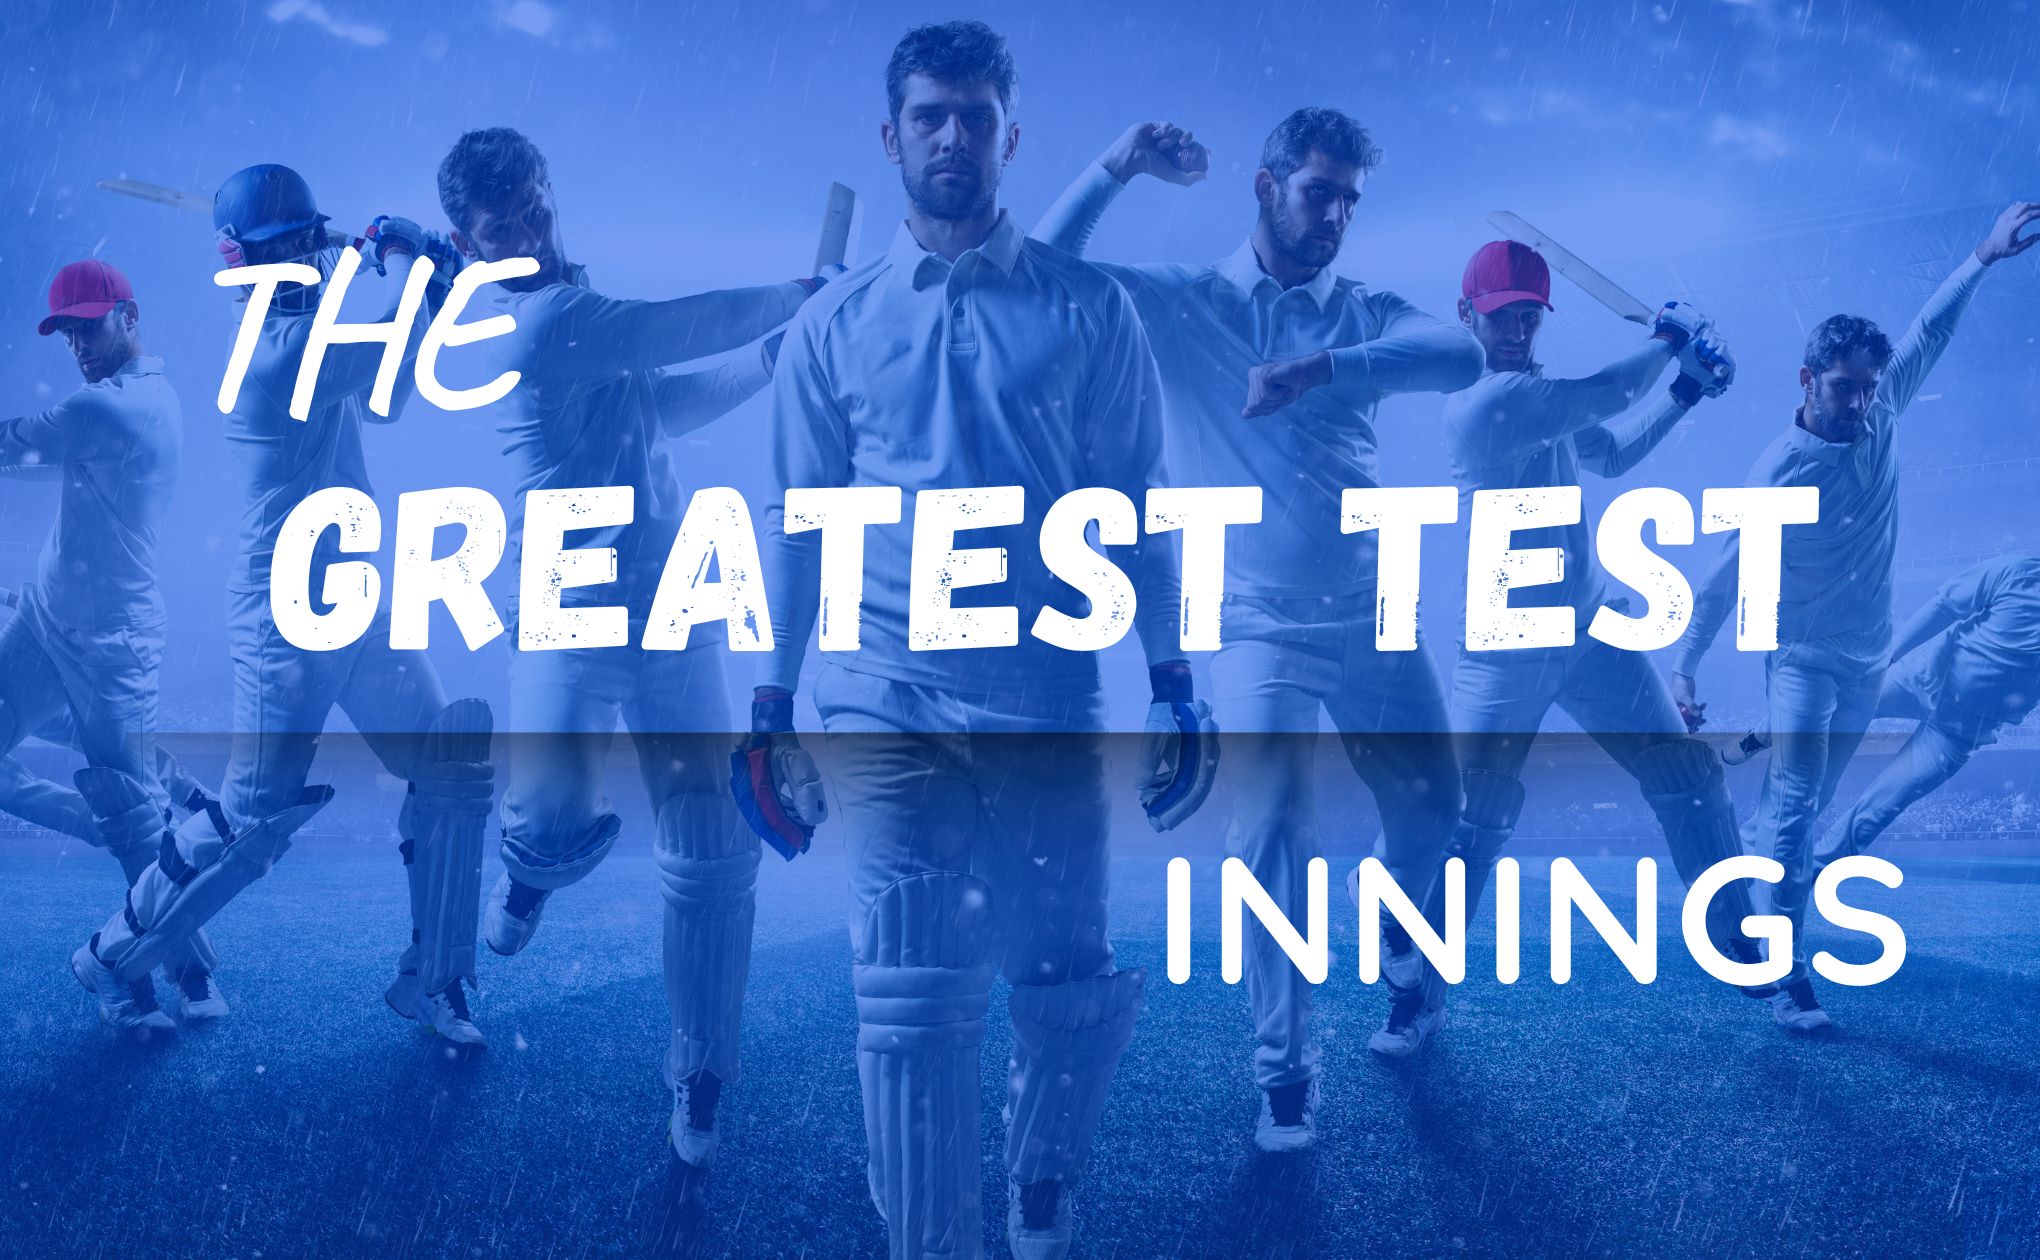 The greatest test innings